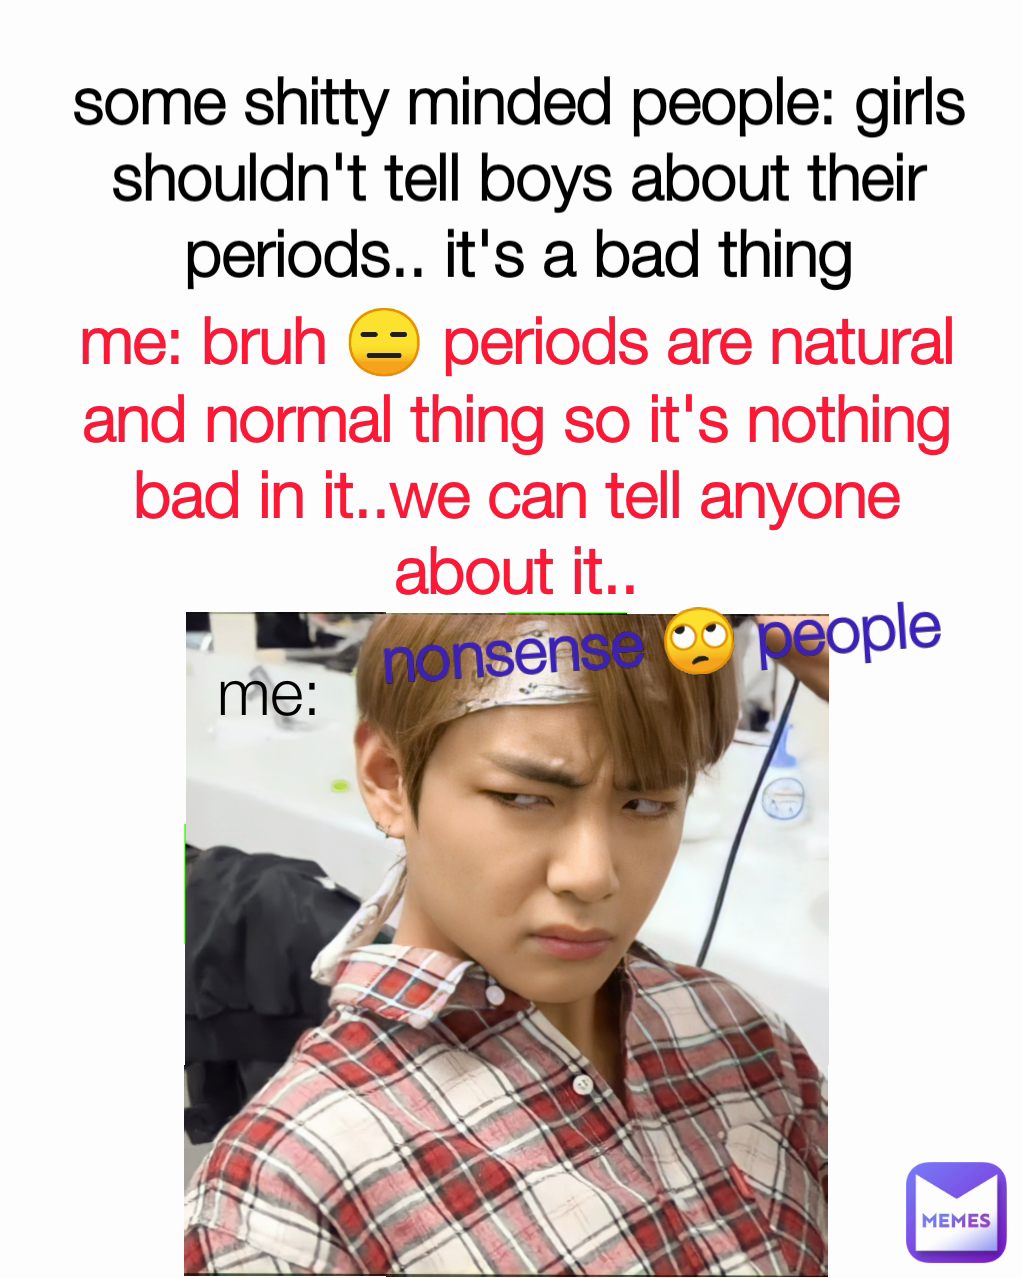 me: bruh 😑 periods are natural and normal thing so it's nothing bad in it..we can tell anyone about it.. some shitty minded people: girls shouldn't tell boys about their periods.. it's a bad thing me: nonsense 🙄 people